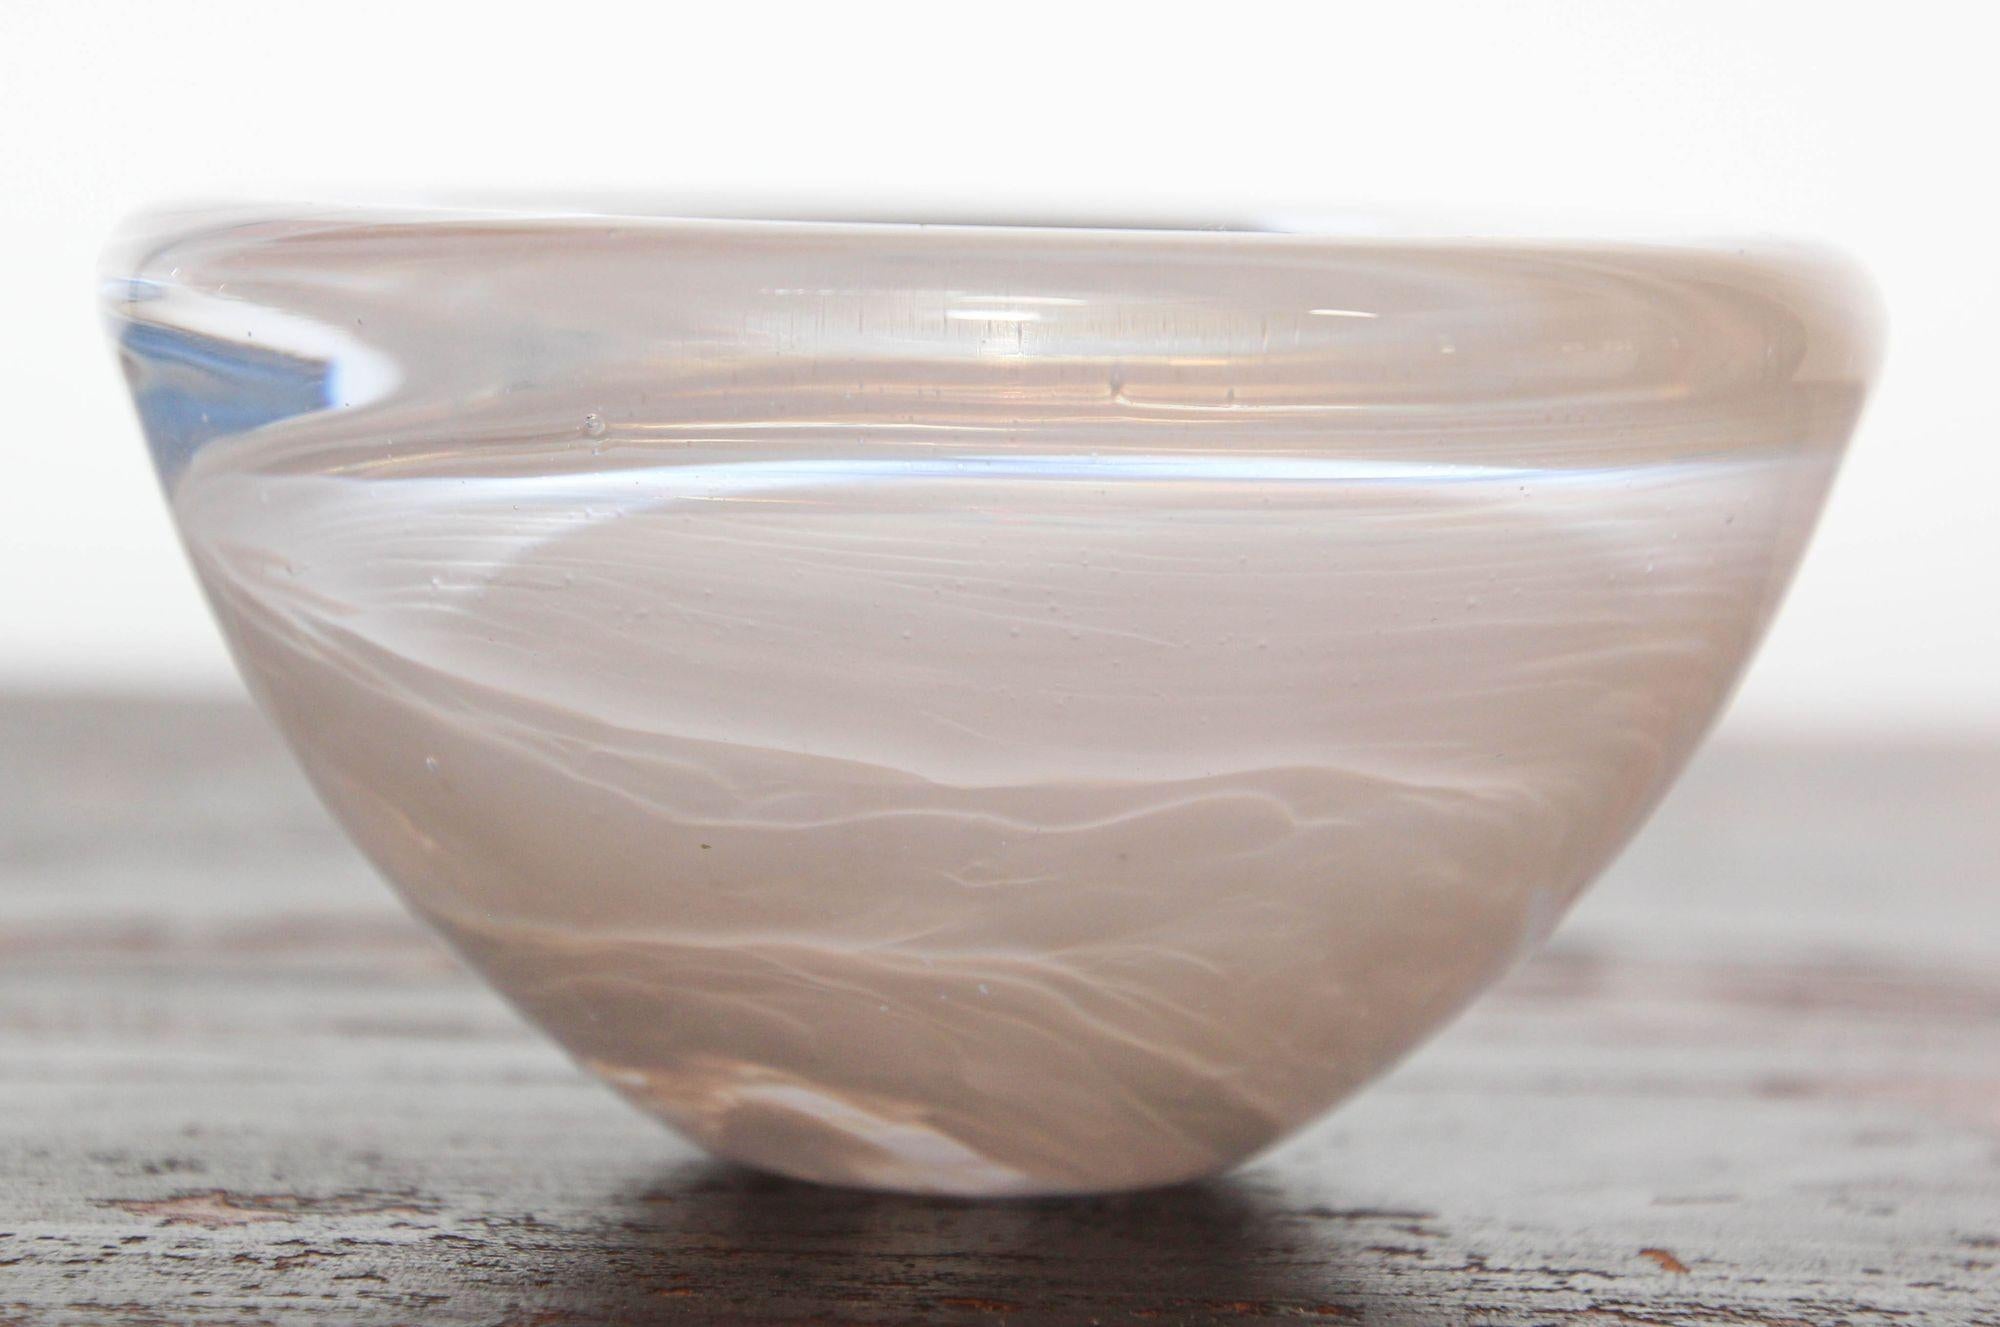 Anna Ehrner for Kosta Boda white crystal paperweight or votive candle holder.
Kosta Boda white crystal candle holder by Anna Ehrner, 1990s
A Kosta Boda votive holder or paperweight by Anna Ehrner made from 1981 to 1990 in Kosta, Sweden.
The bowl